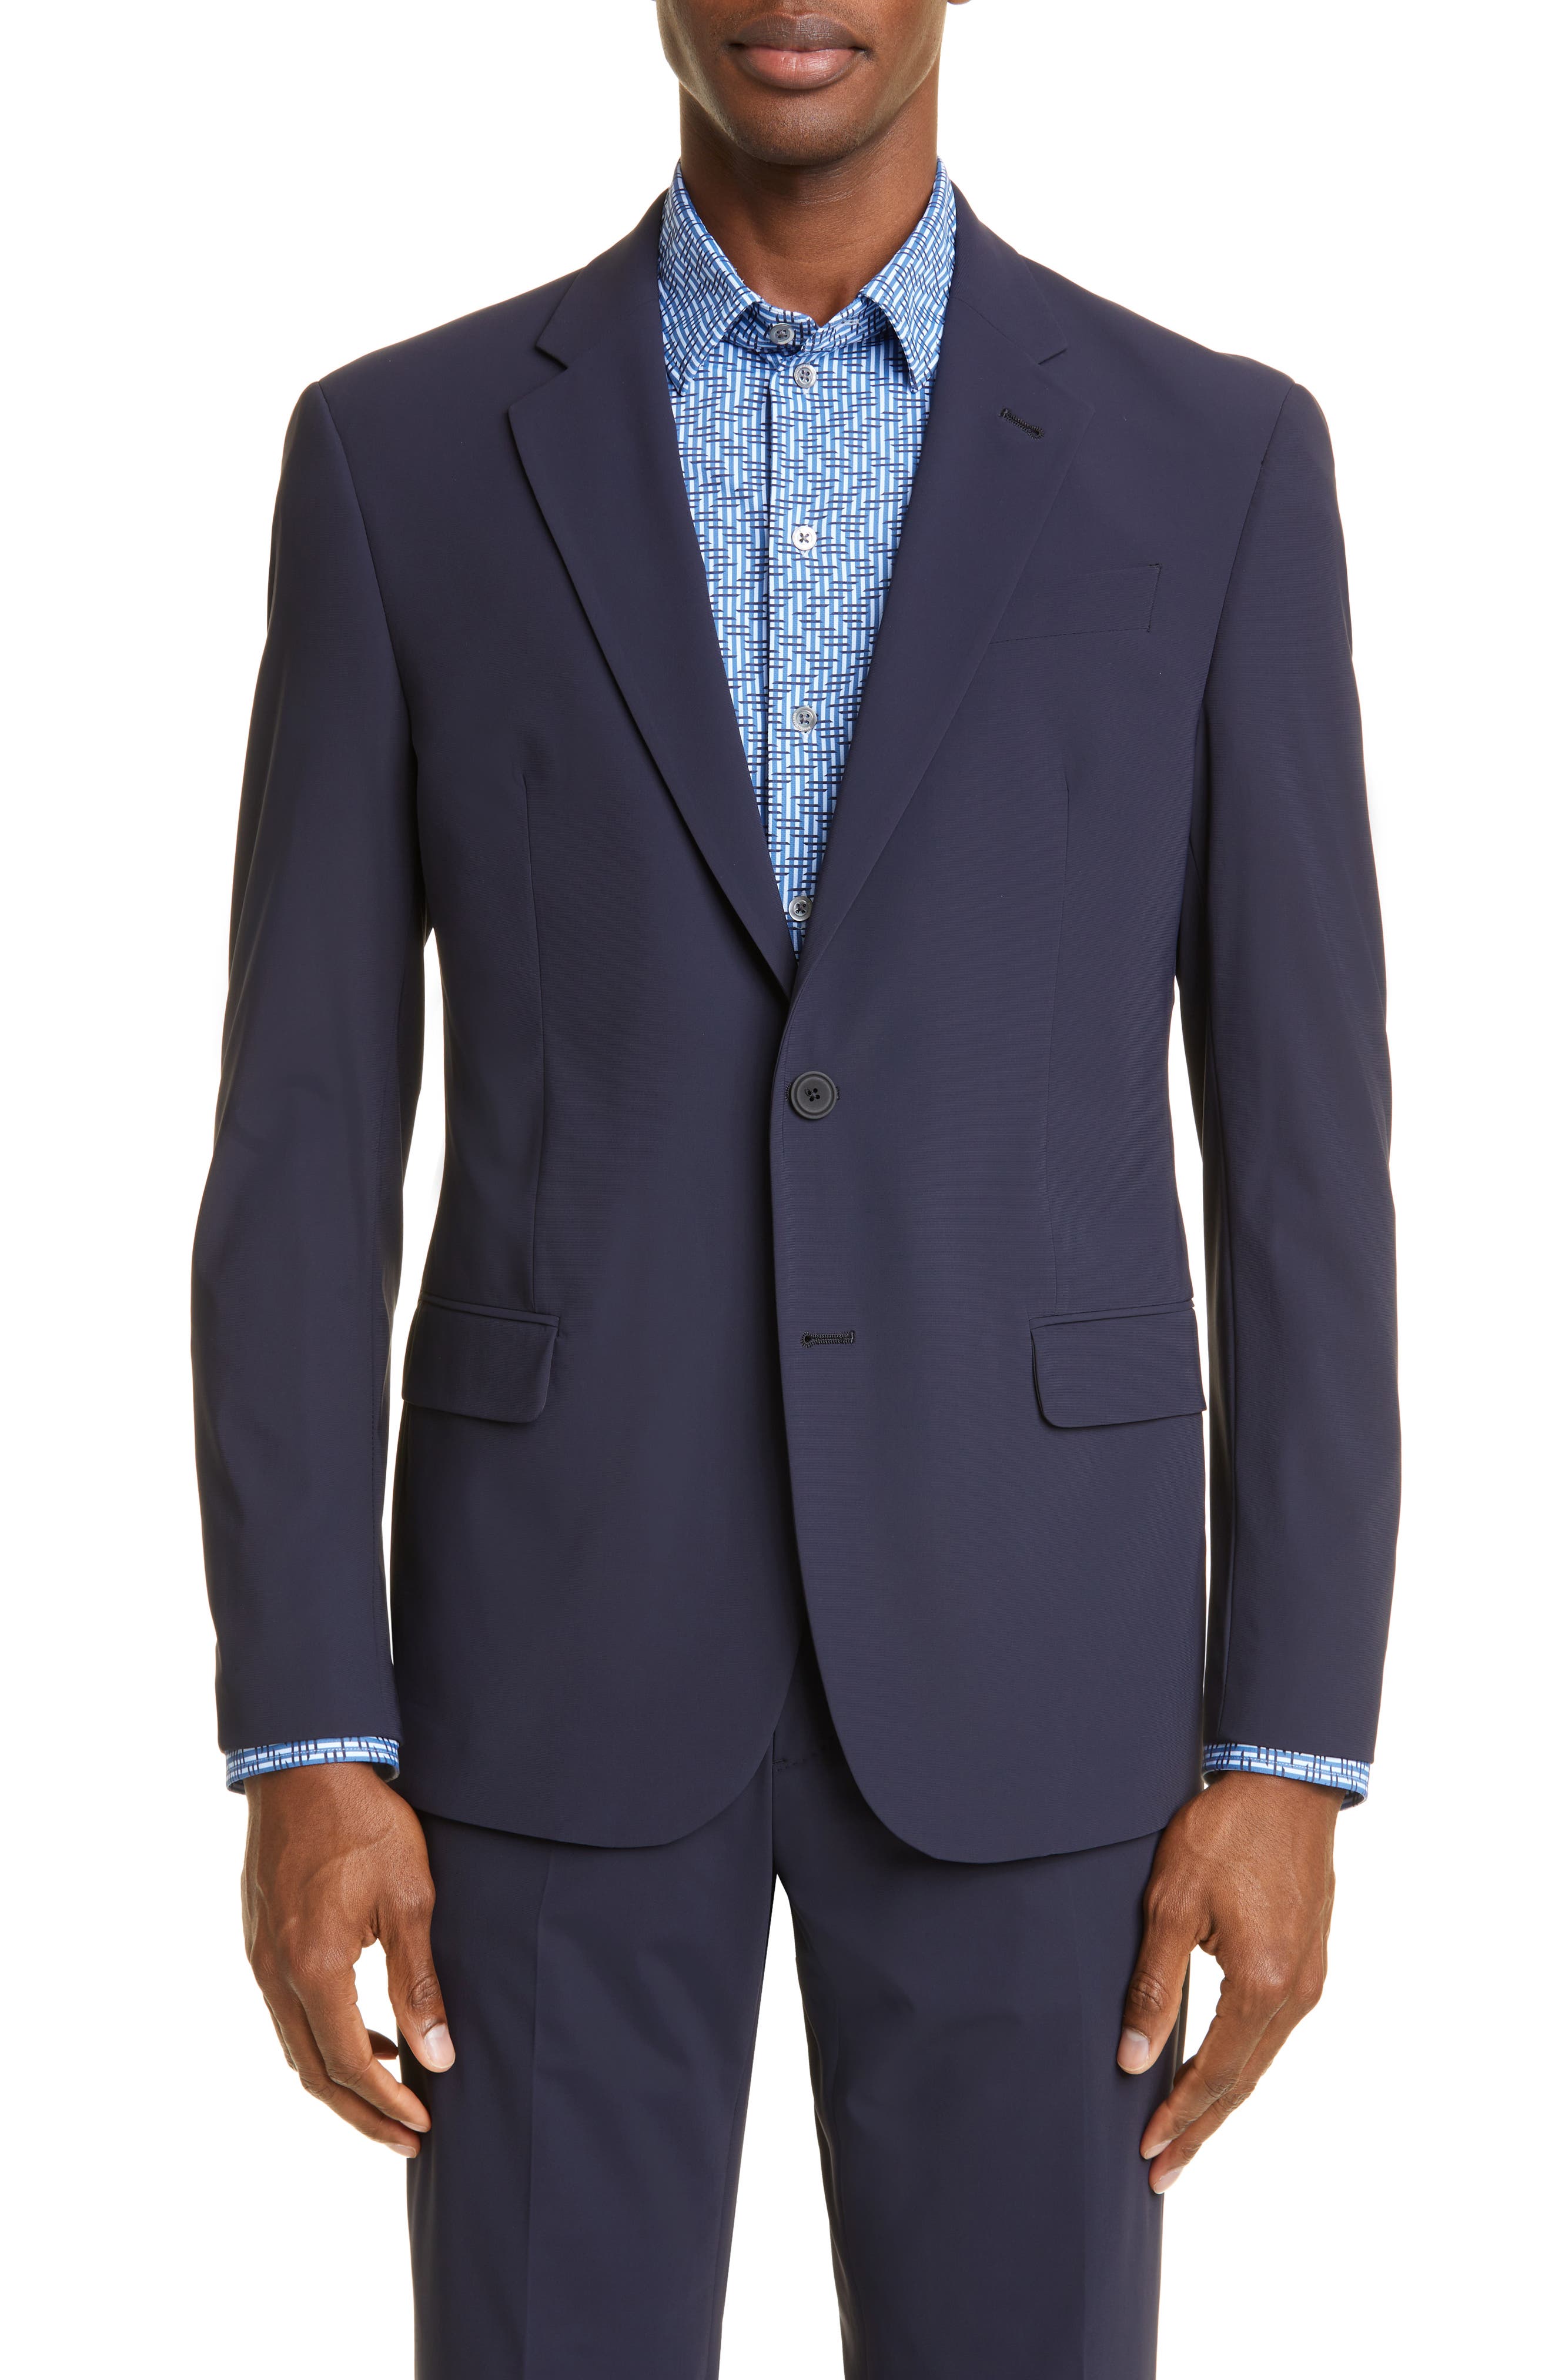 Emporio Armani Techno Performance Solid Sport Coat in Solid Blue Navy